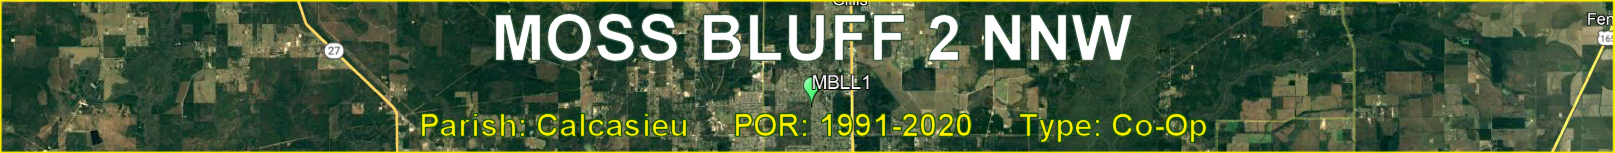 Title image for Moss Bluff 2 NNW